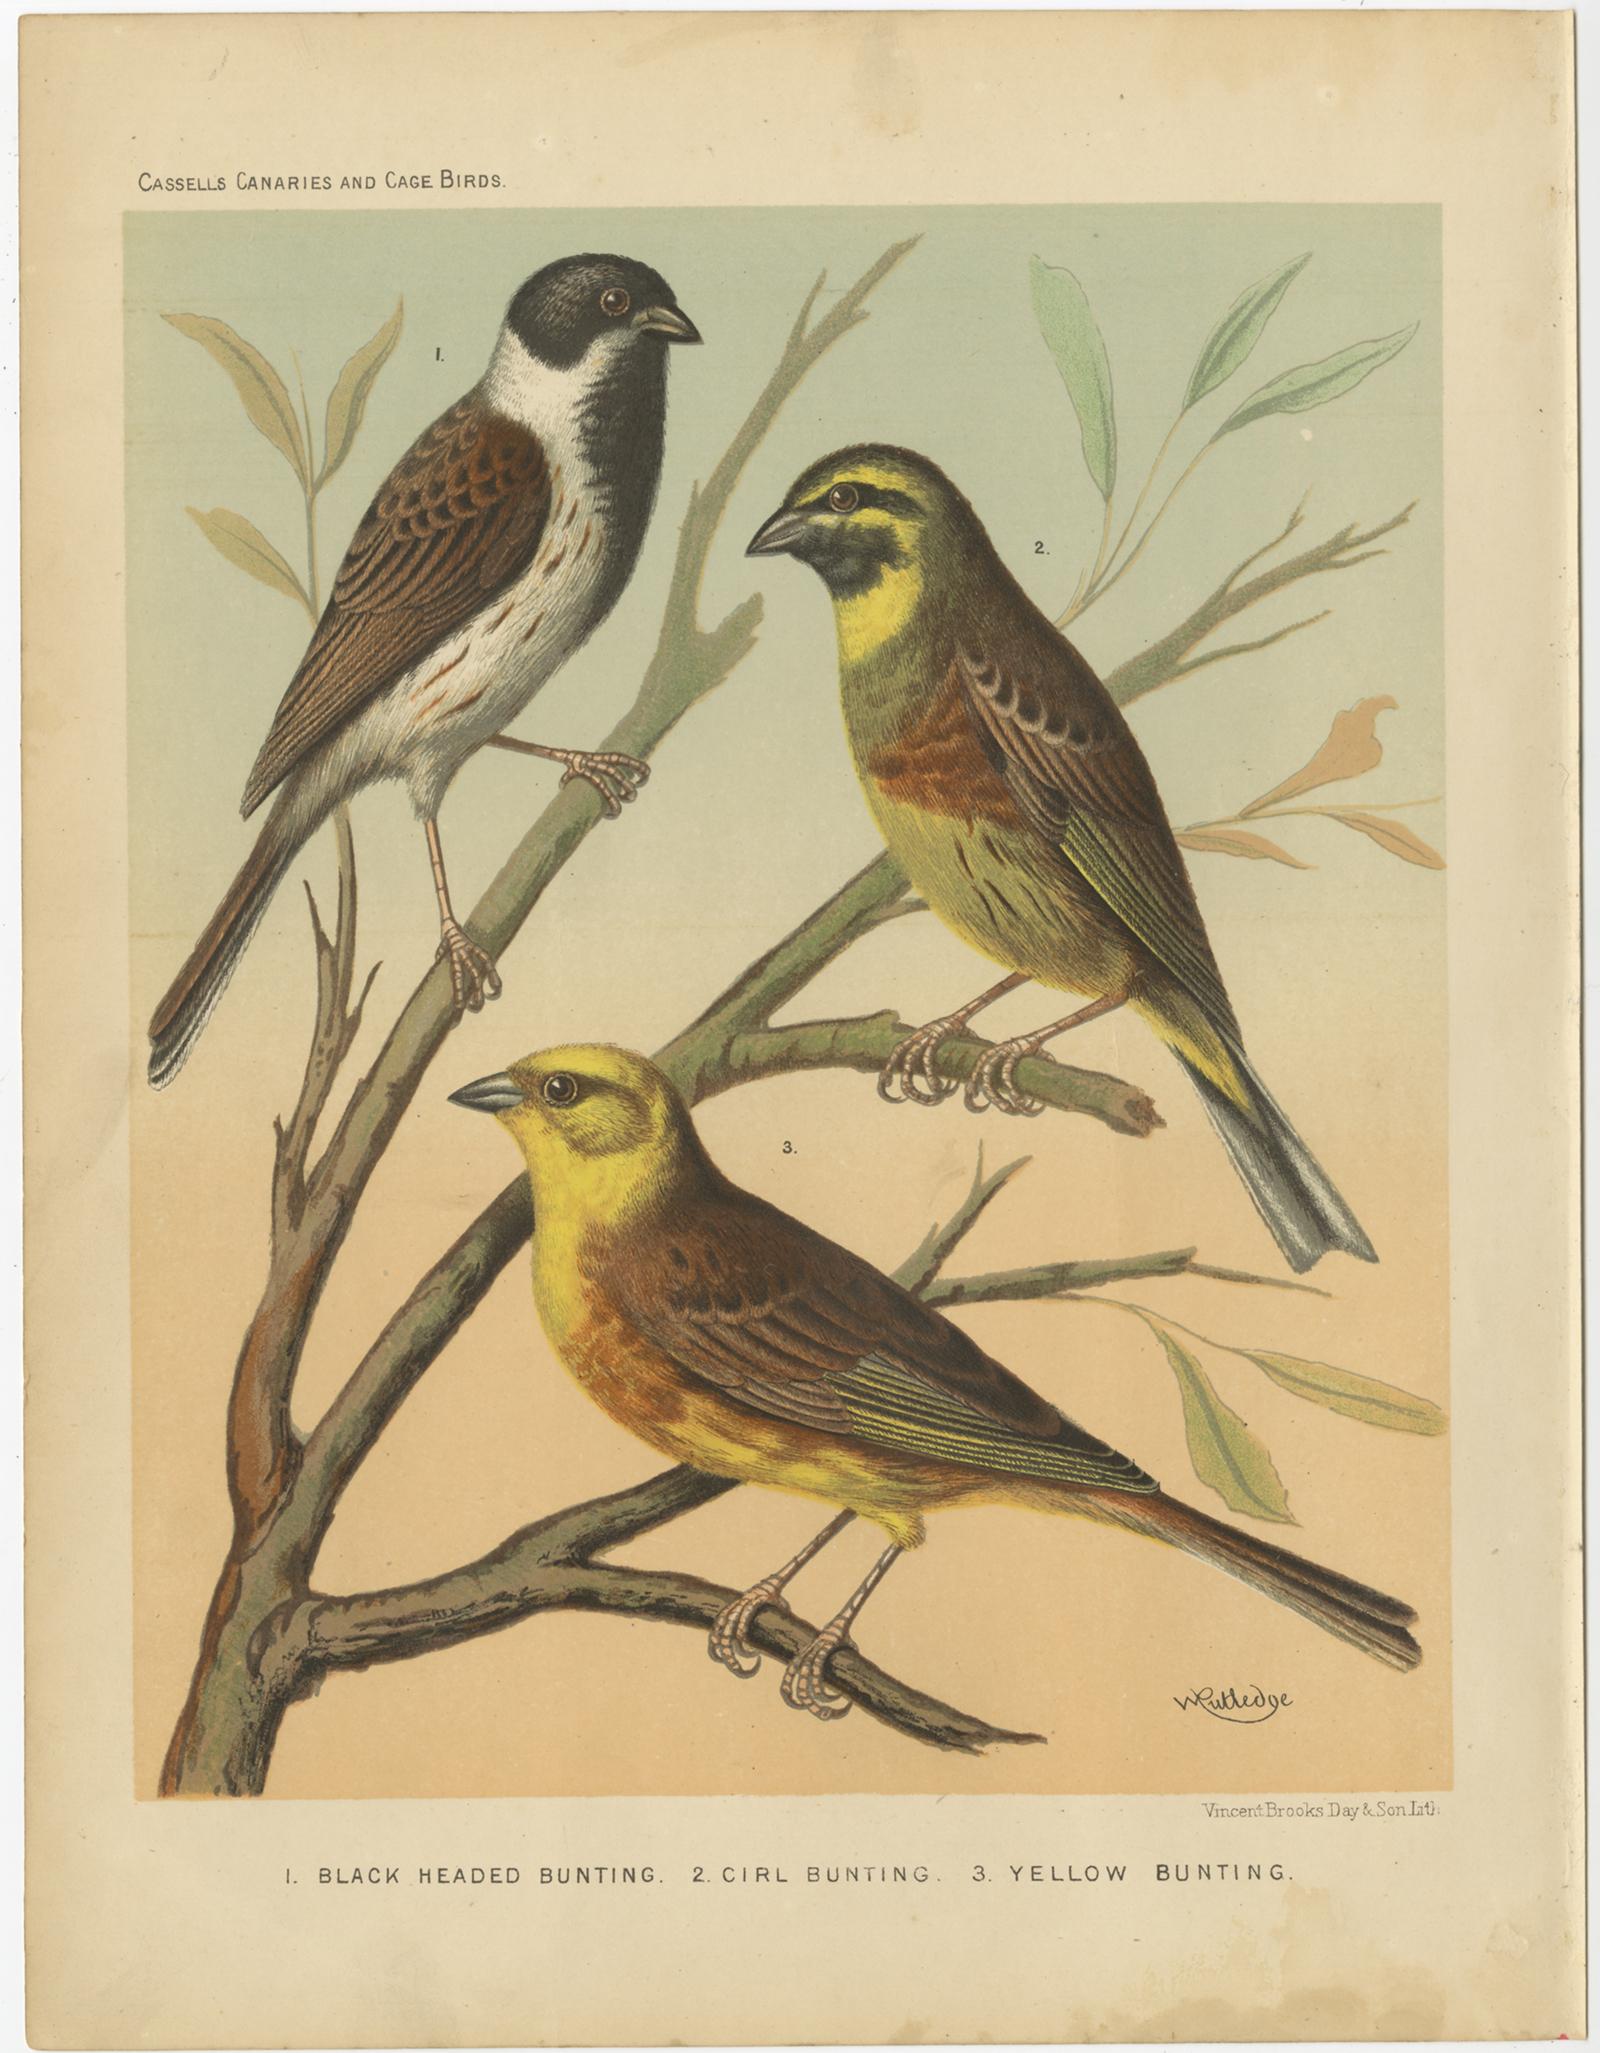 Antique bird print titled '1. Black Headed Bunting 2. Cirl Bunting 3. Yellow Bunting'. Old bird print depicting Black Headed Bunting, Cirl Bunting, Yellow bunting or Japanese yellow bunting. This print originates from: 'Illustrated book of canaries